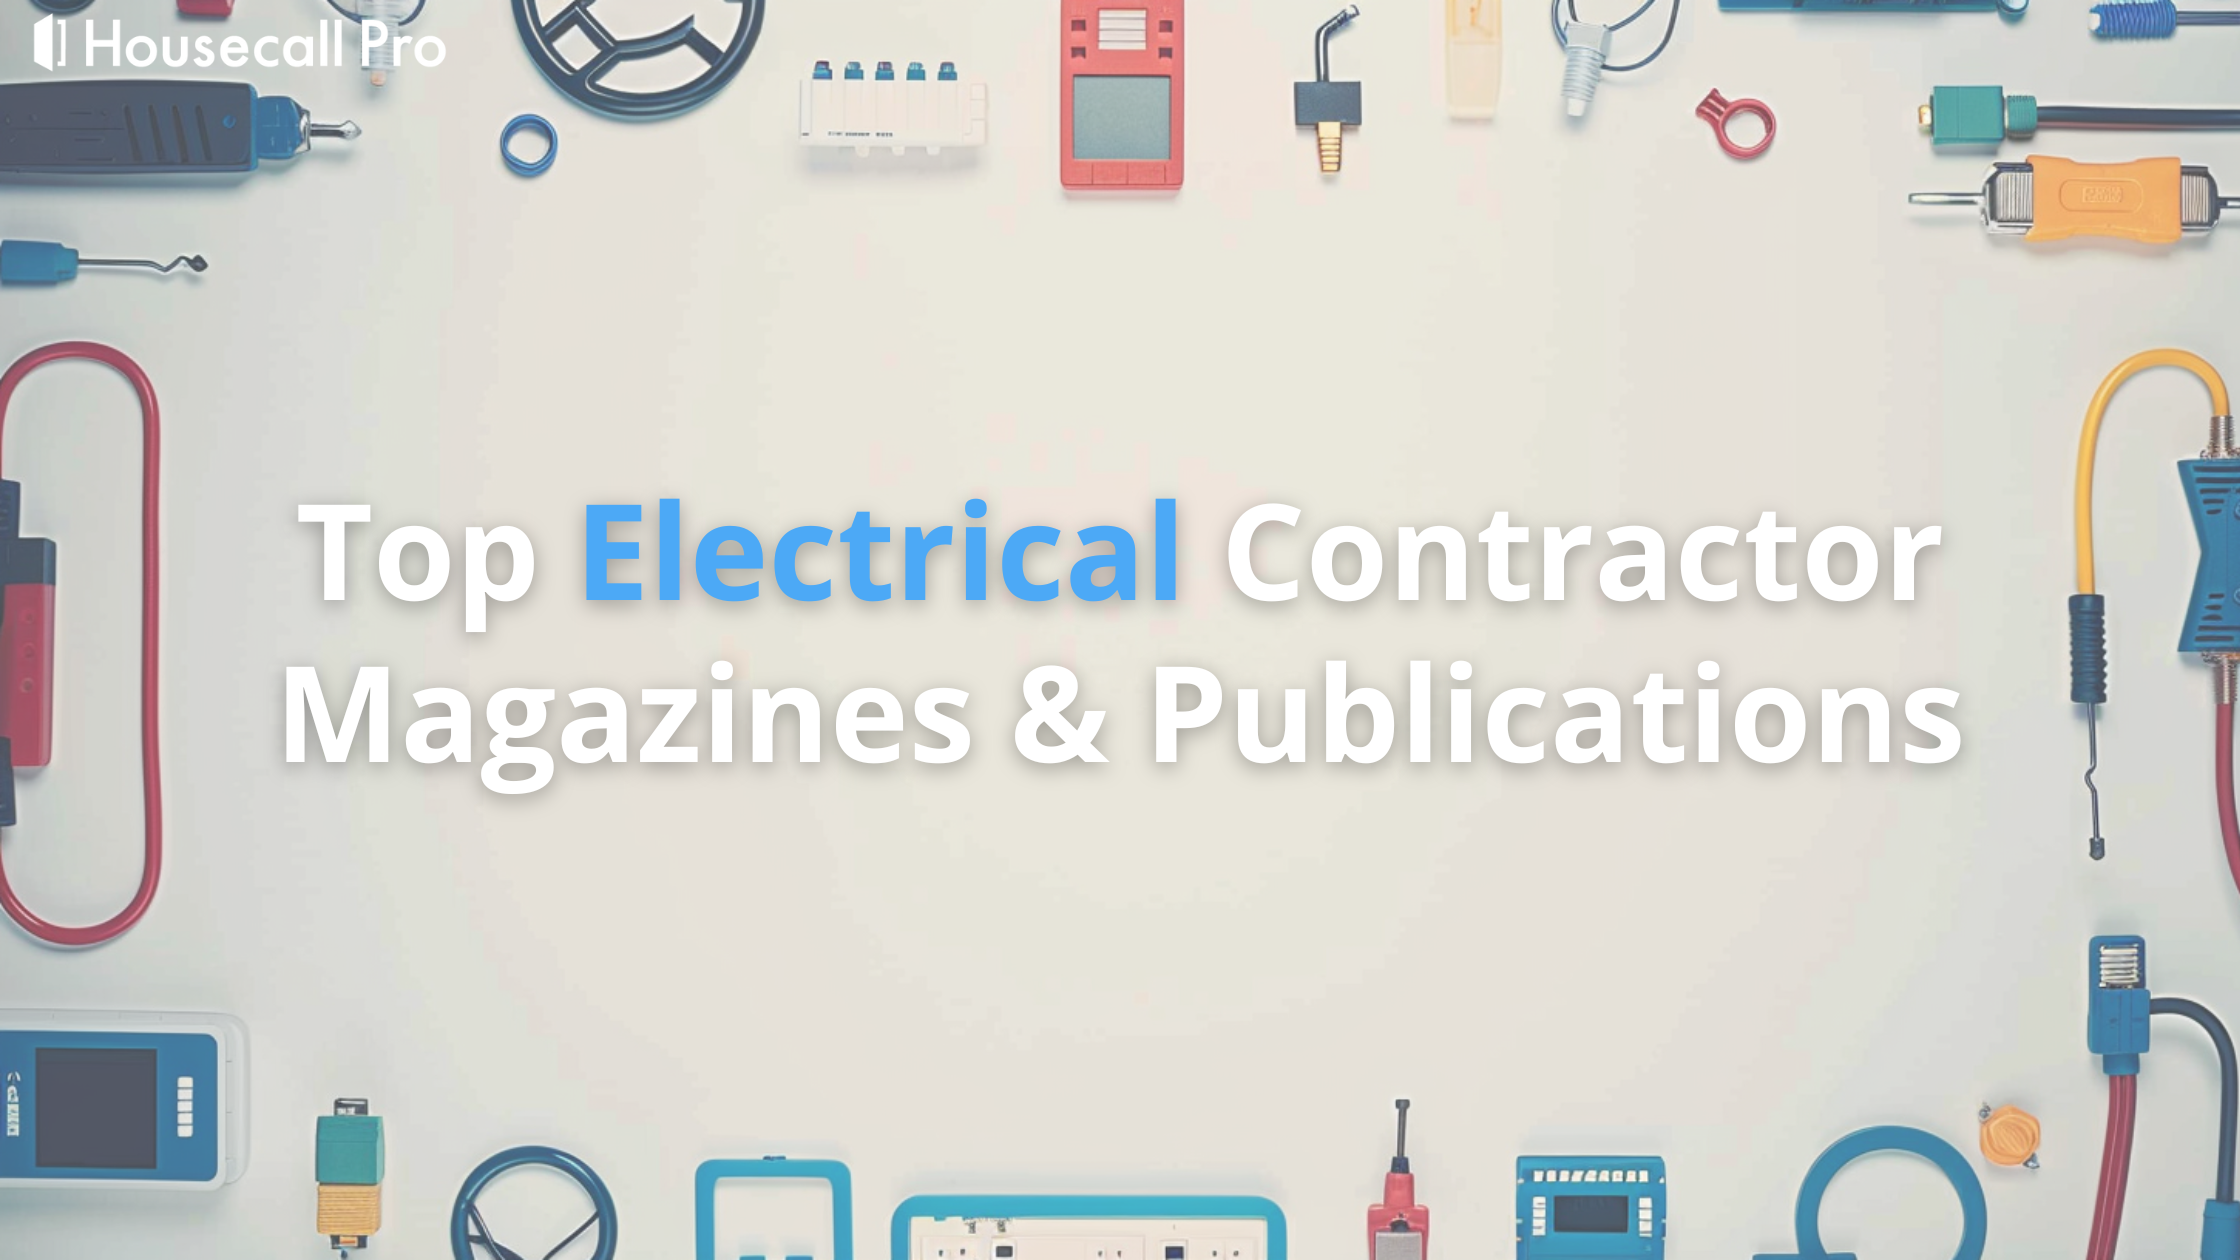 Top Electrical Contractor Magazines & Publications